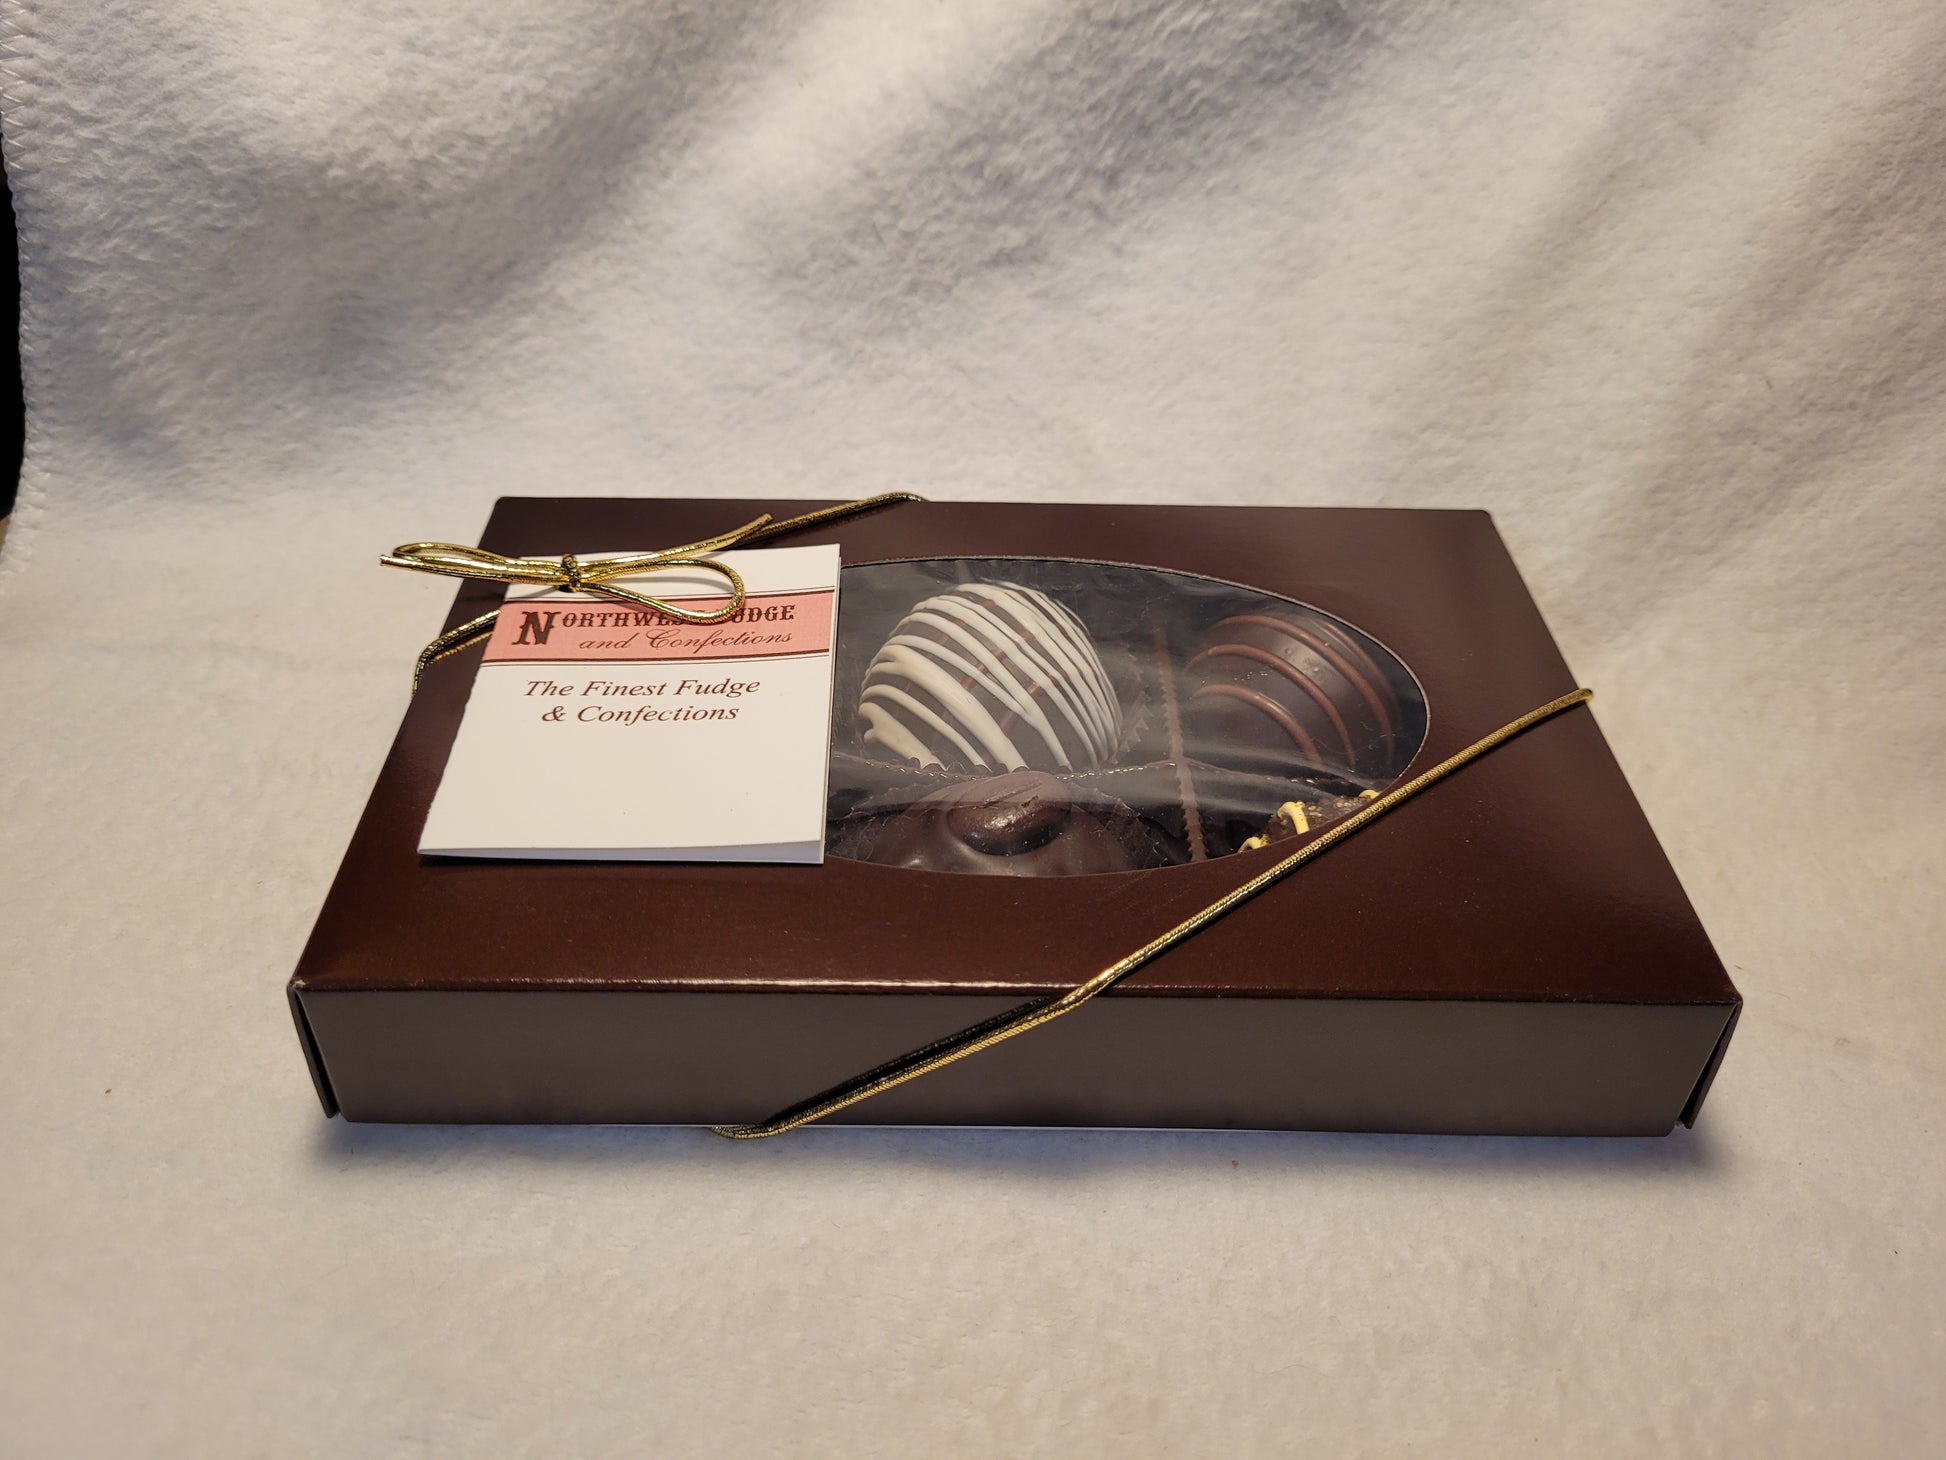 6 Piece gift box of large truffles boxed as a gift